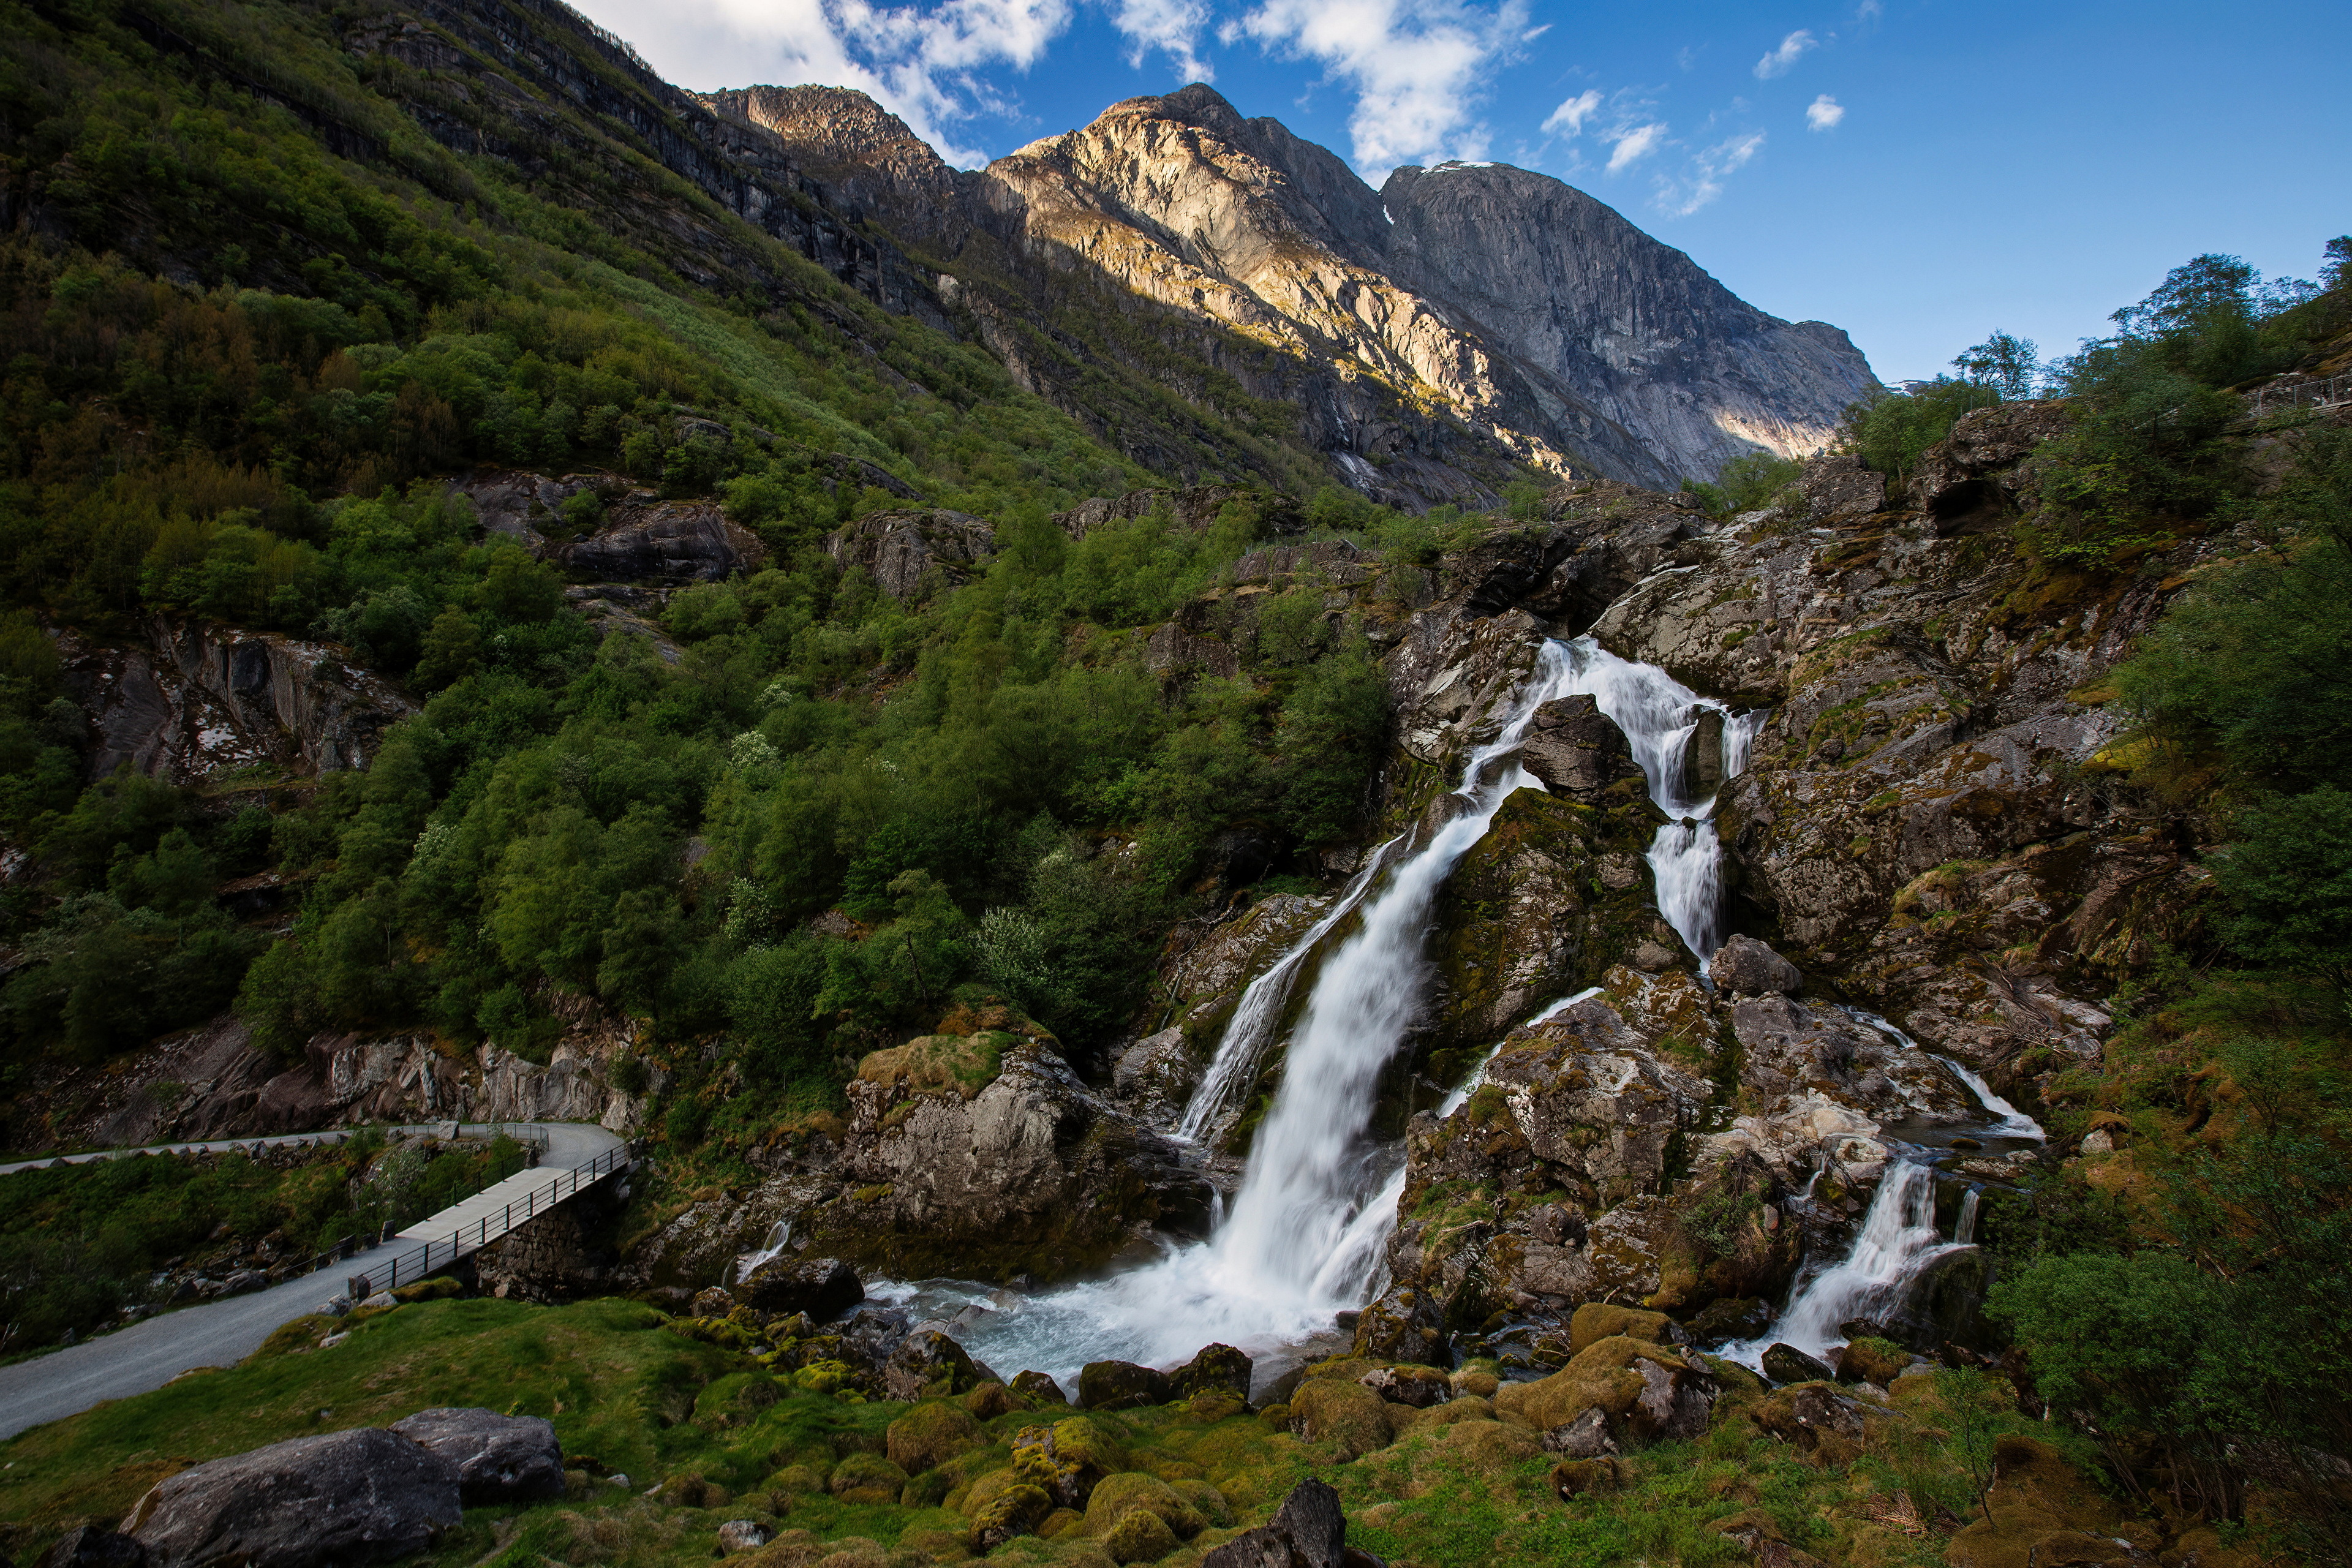 General 3840x2560 Norway road nature landscape waterfall mountains forest rocks